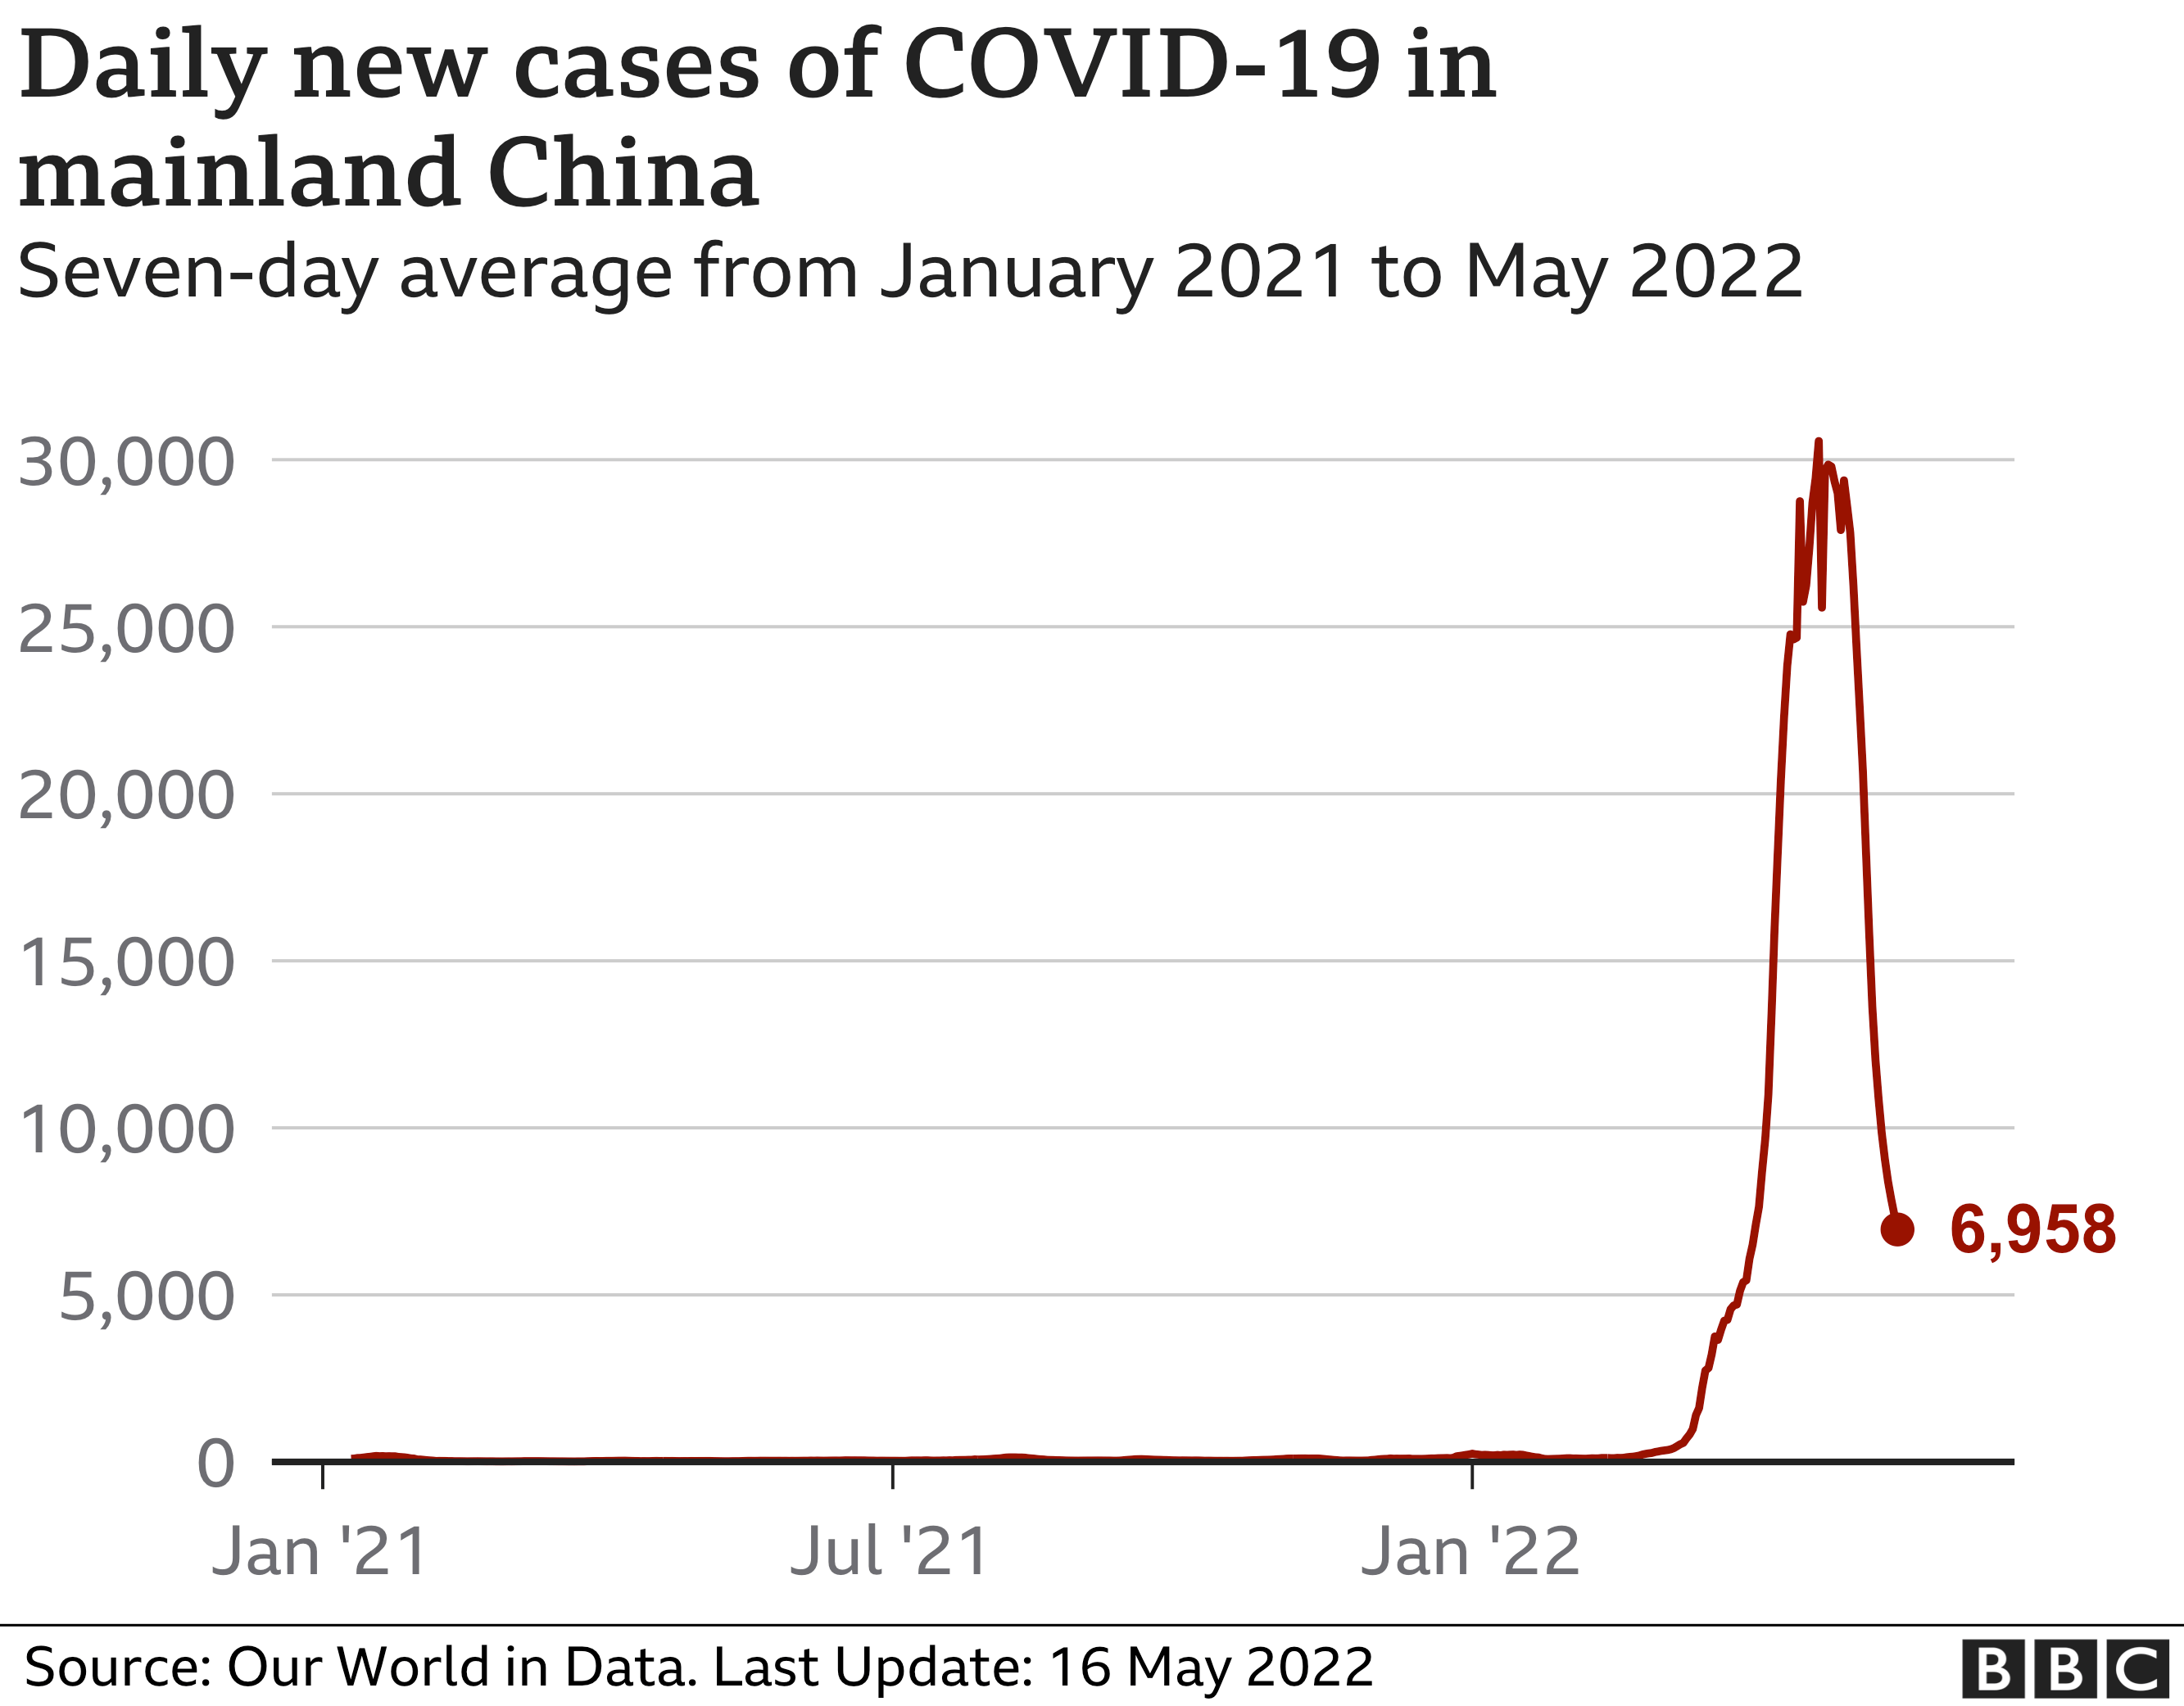 Line chart showing 7 day average daily cases in mainland China